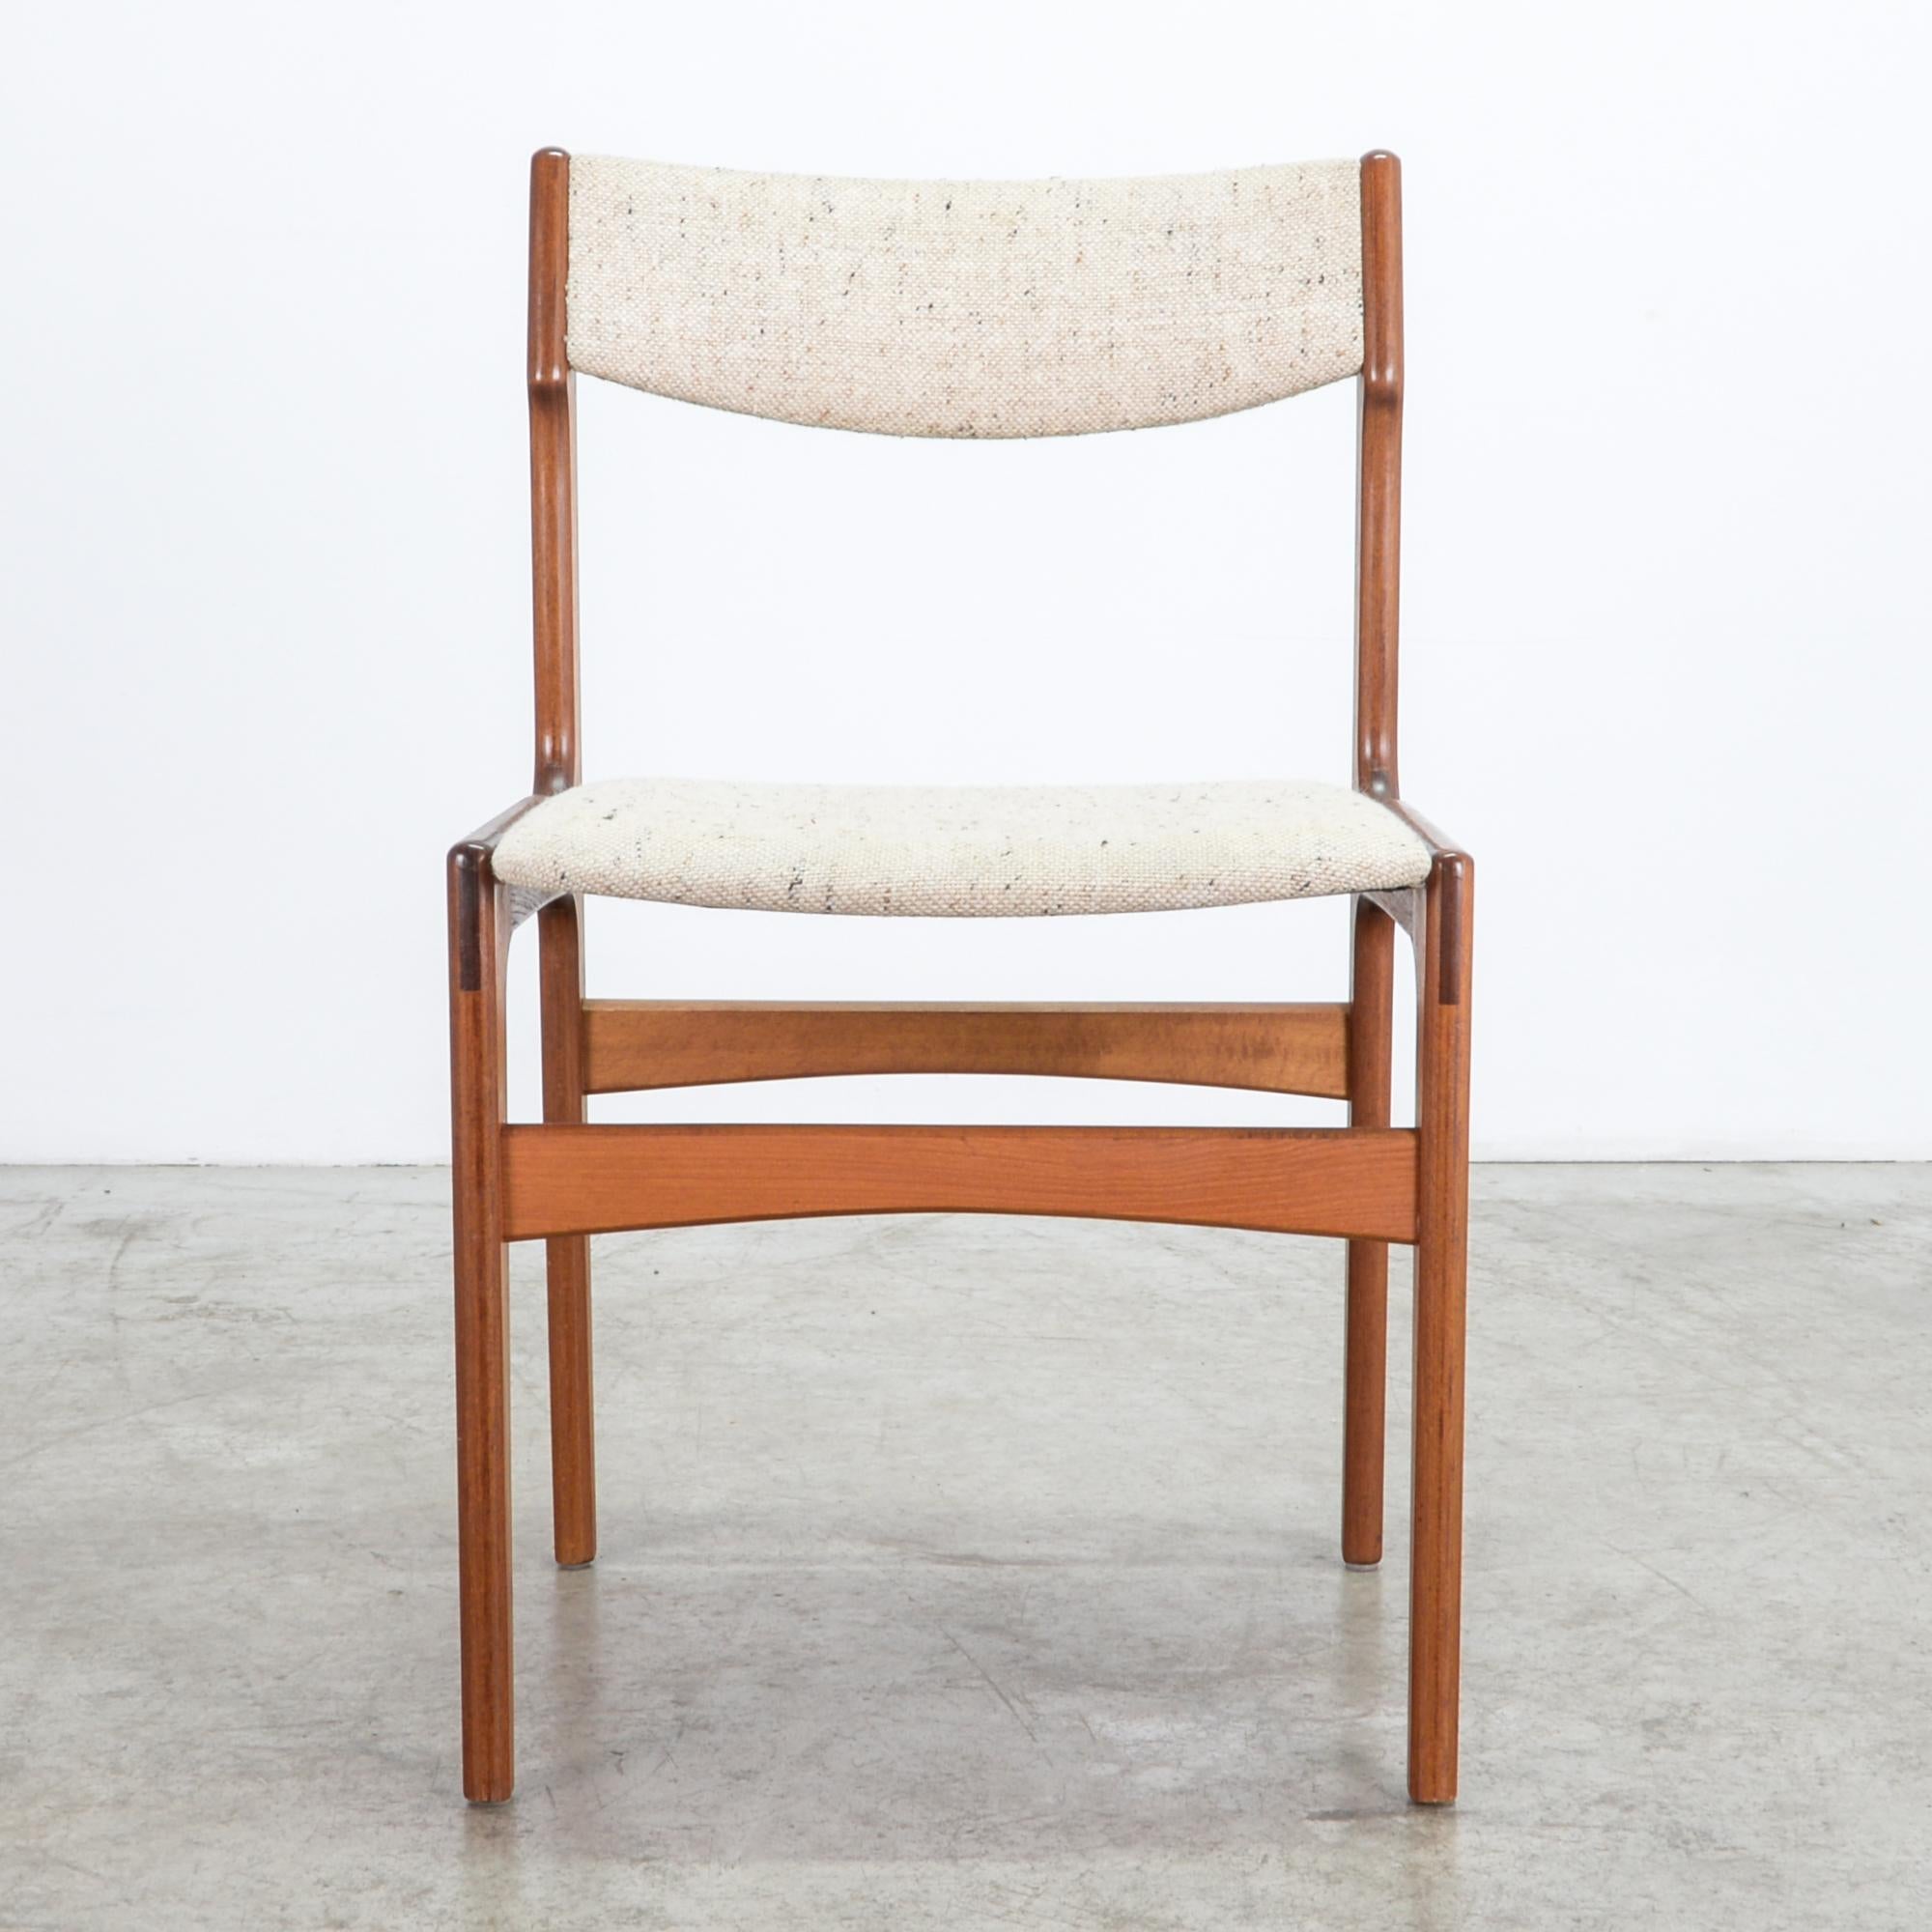 From Denmark circa 1960, these simple and finely crafted chairs are sleek and inviting. Updated with a cotton-linen-polyester upholstery fabric, with great natural texture and easily cleaned. A characteristic mid-20th century design features clean